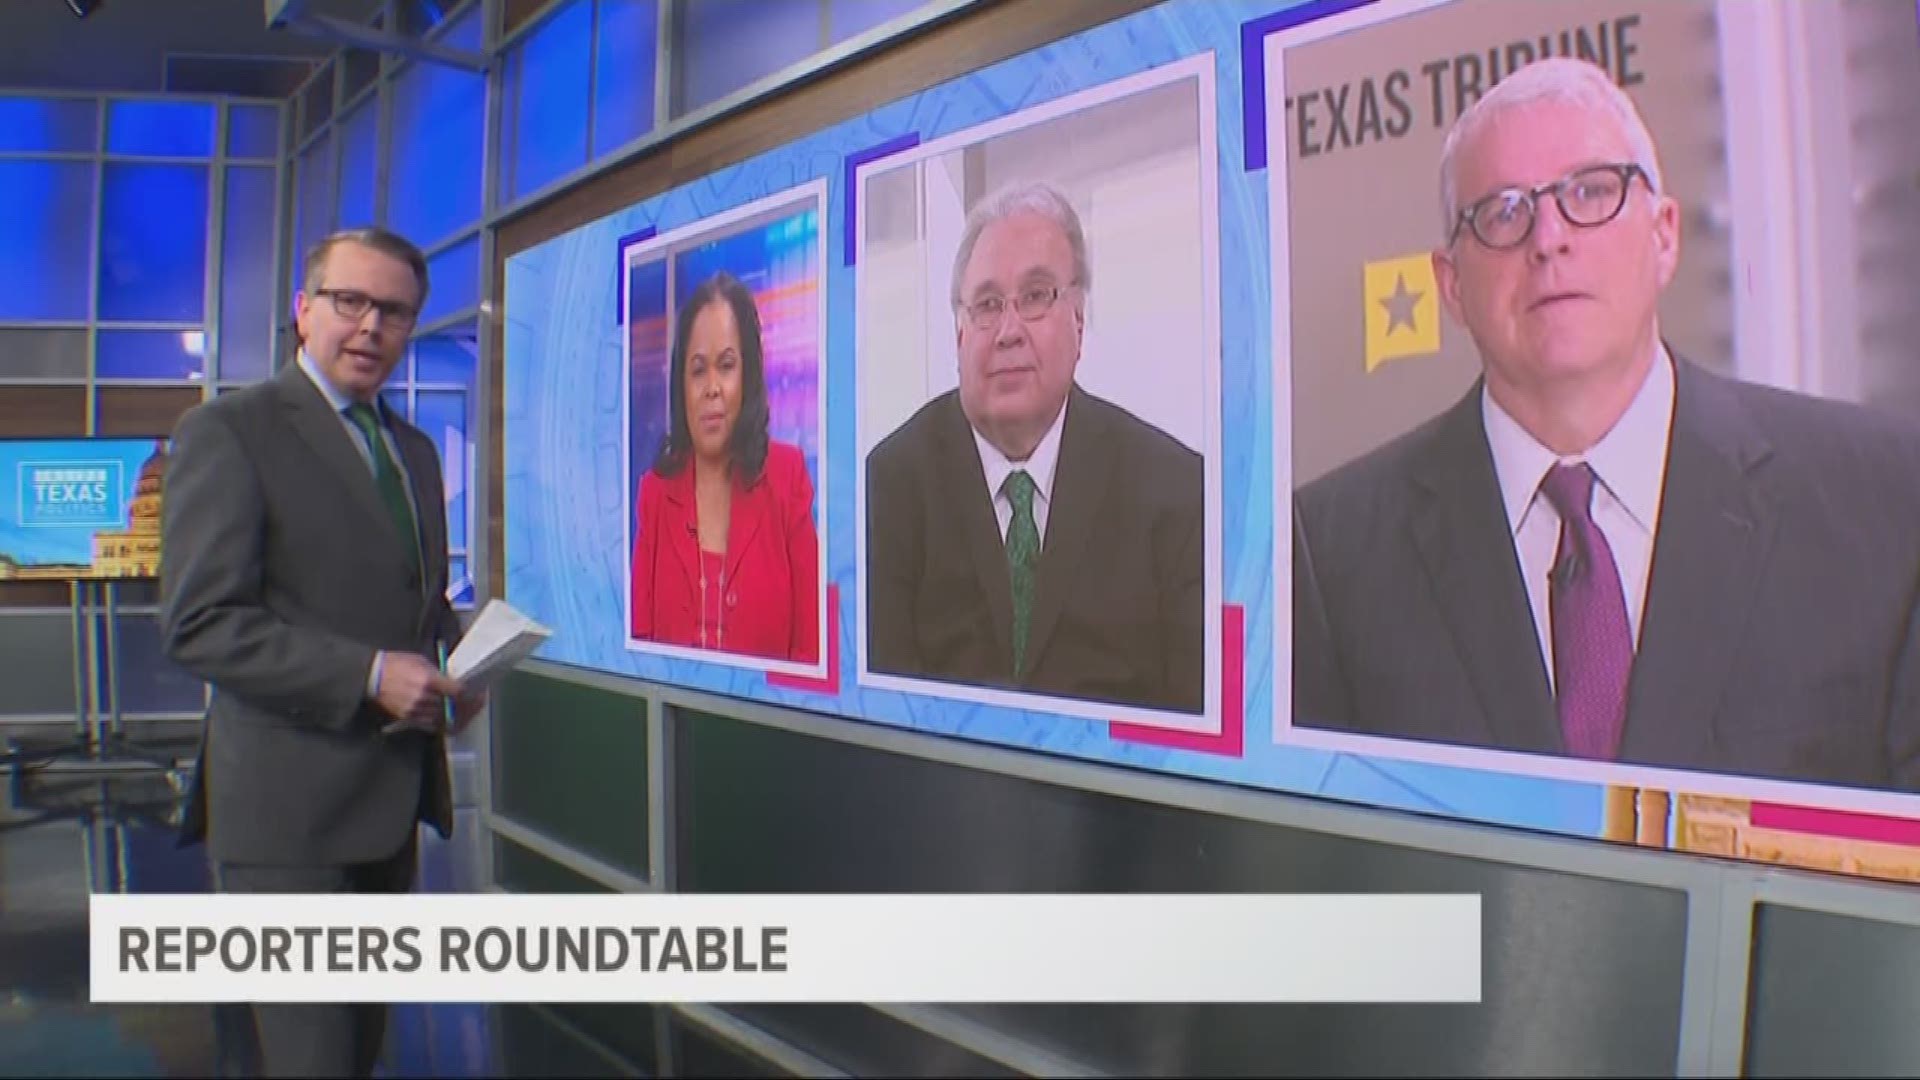 On the Roundtable, Ross Ramsey, Bud Kennedy, and Berna Dean Steptoe, WFAA's political producer, joined host Jason Whitely to discuss where Allred’s district stands.